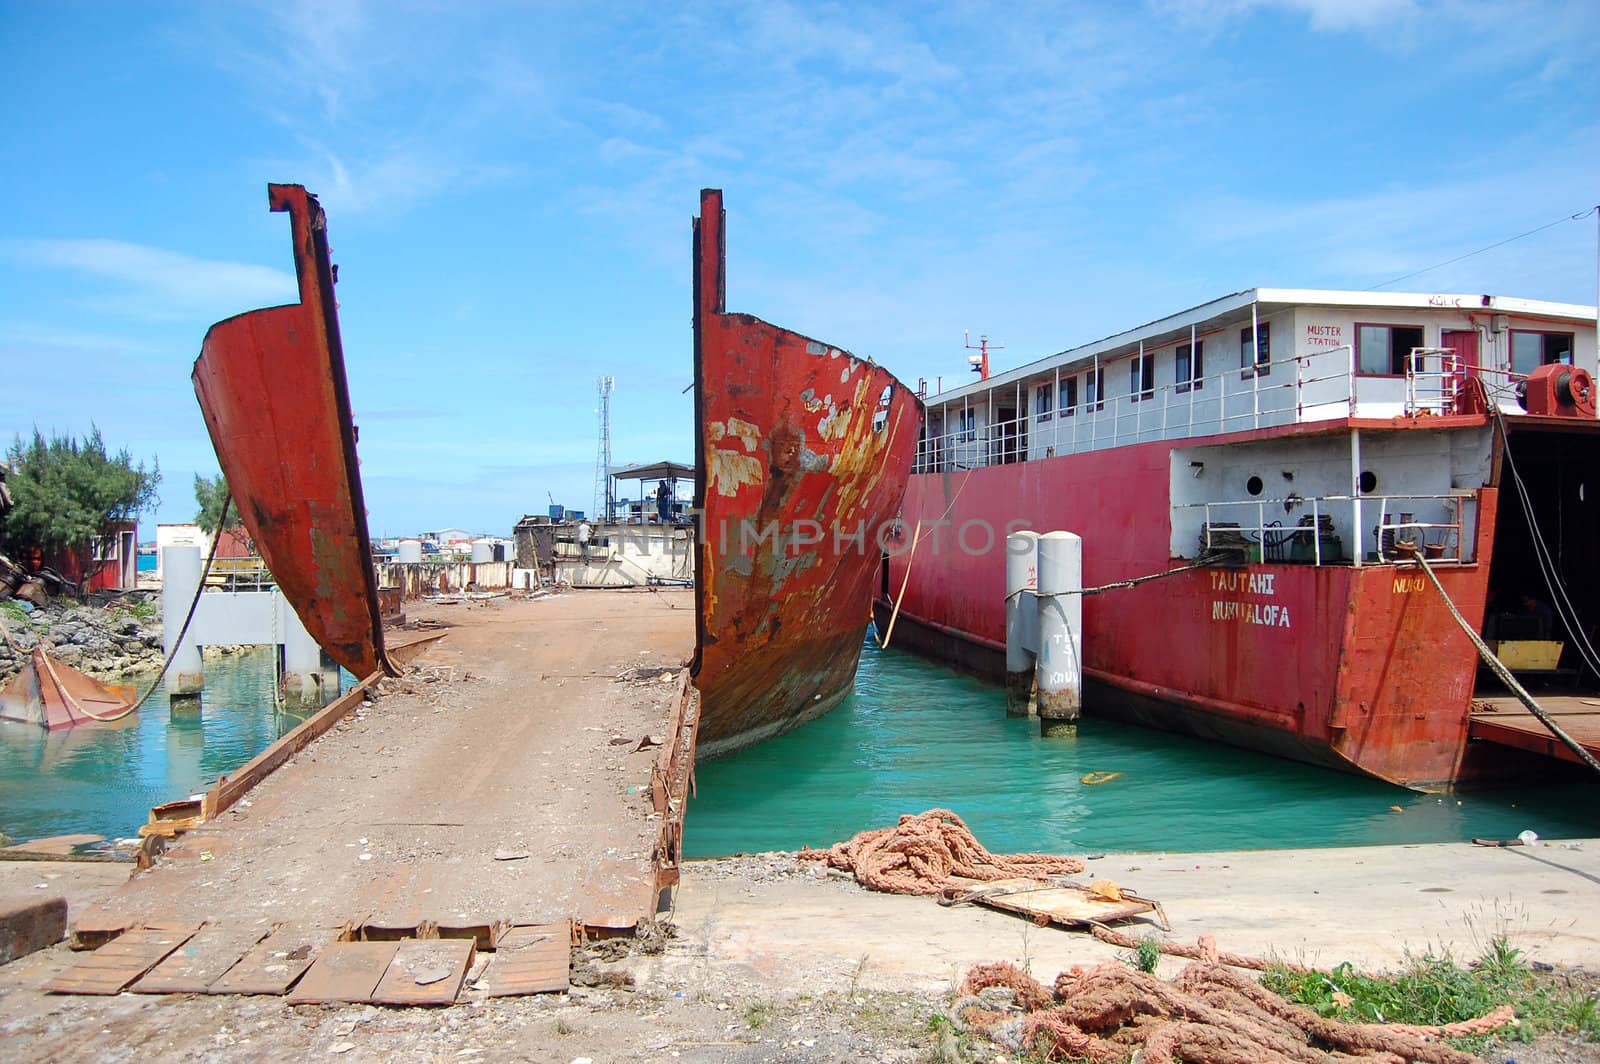 Abandoned red ships in port, Tonga Islands